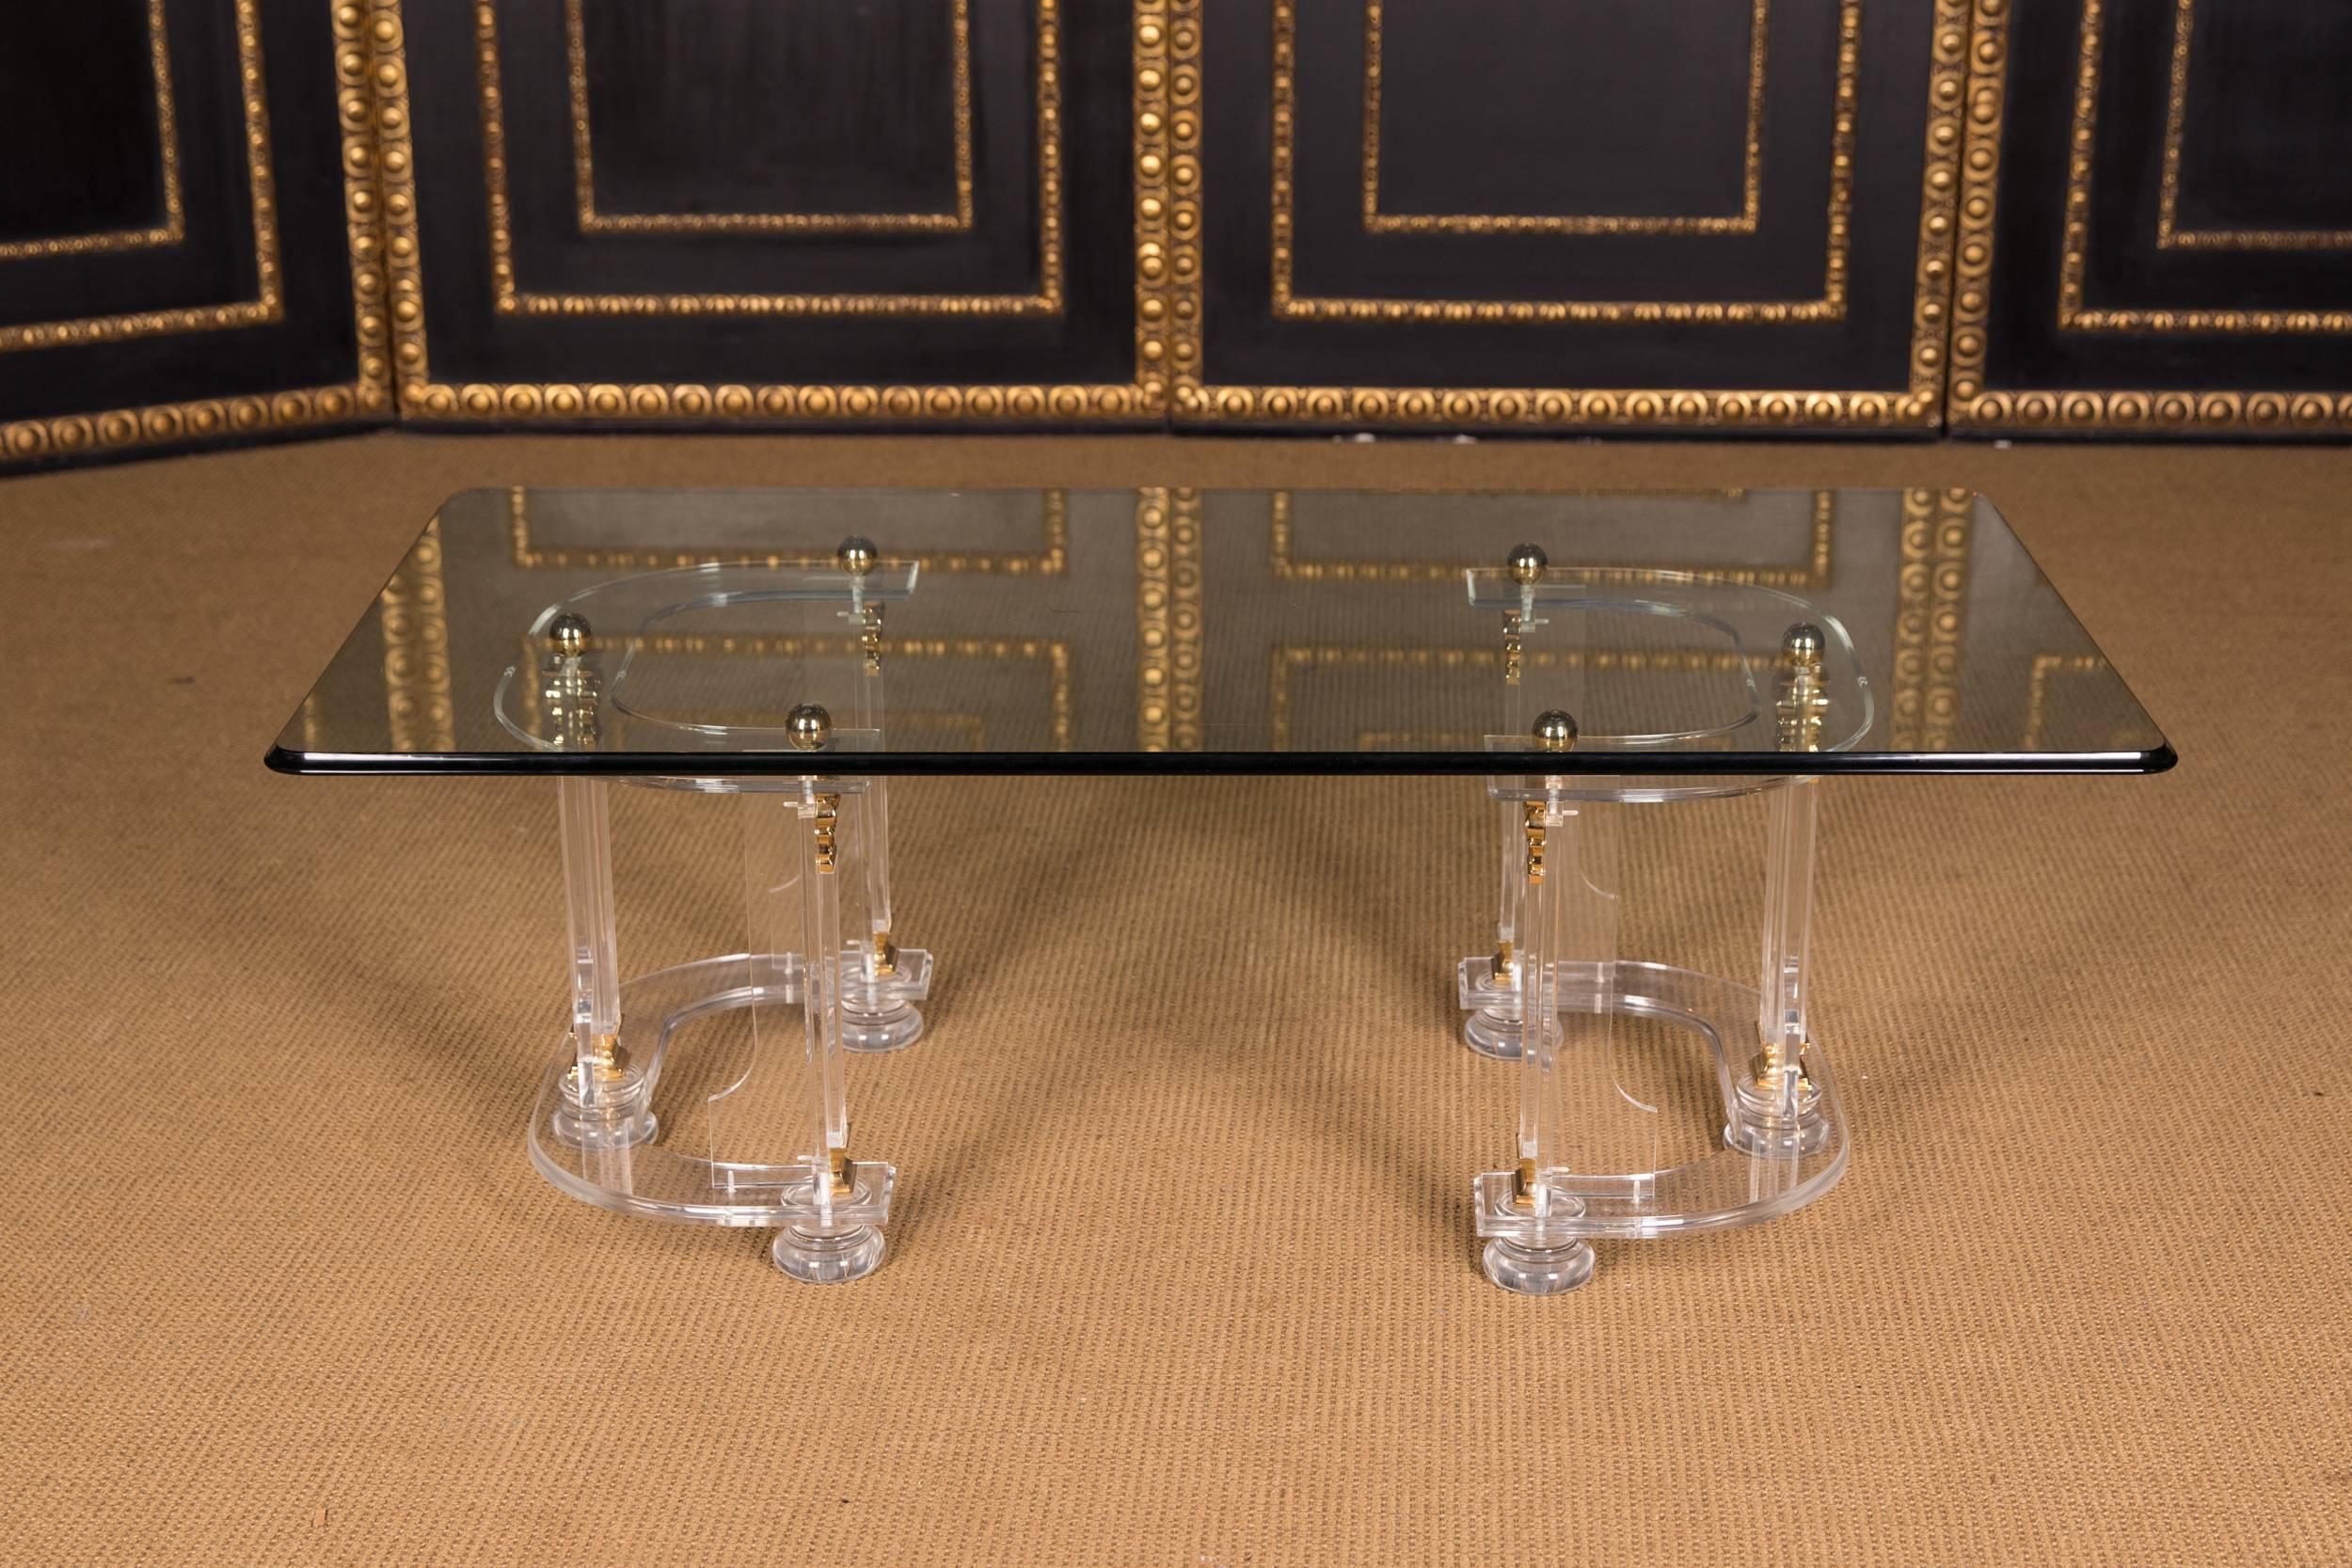 Exclusive acrylic coffee table with two glass panels with gold colored frame.

Made in Italy.

Light surface scratches, otherwise good condition

Please take a look at the detailed pictures.

Measurements.
Length:135cm
Widht:75 cm.